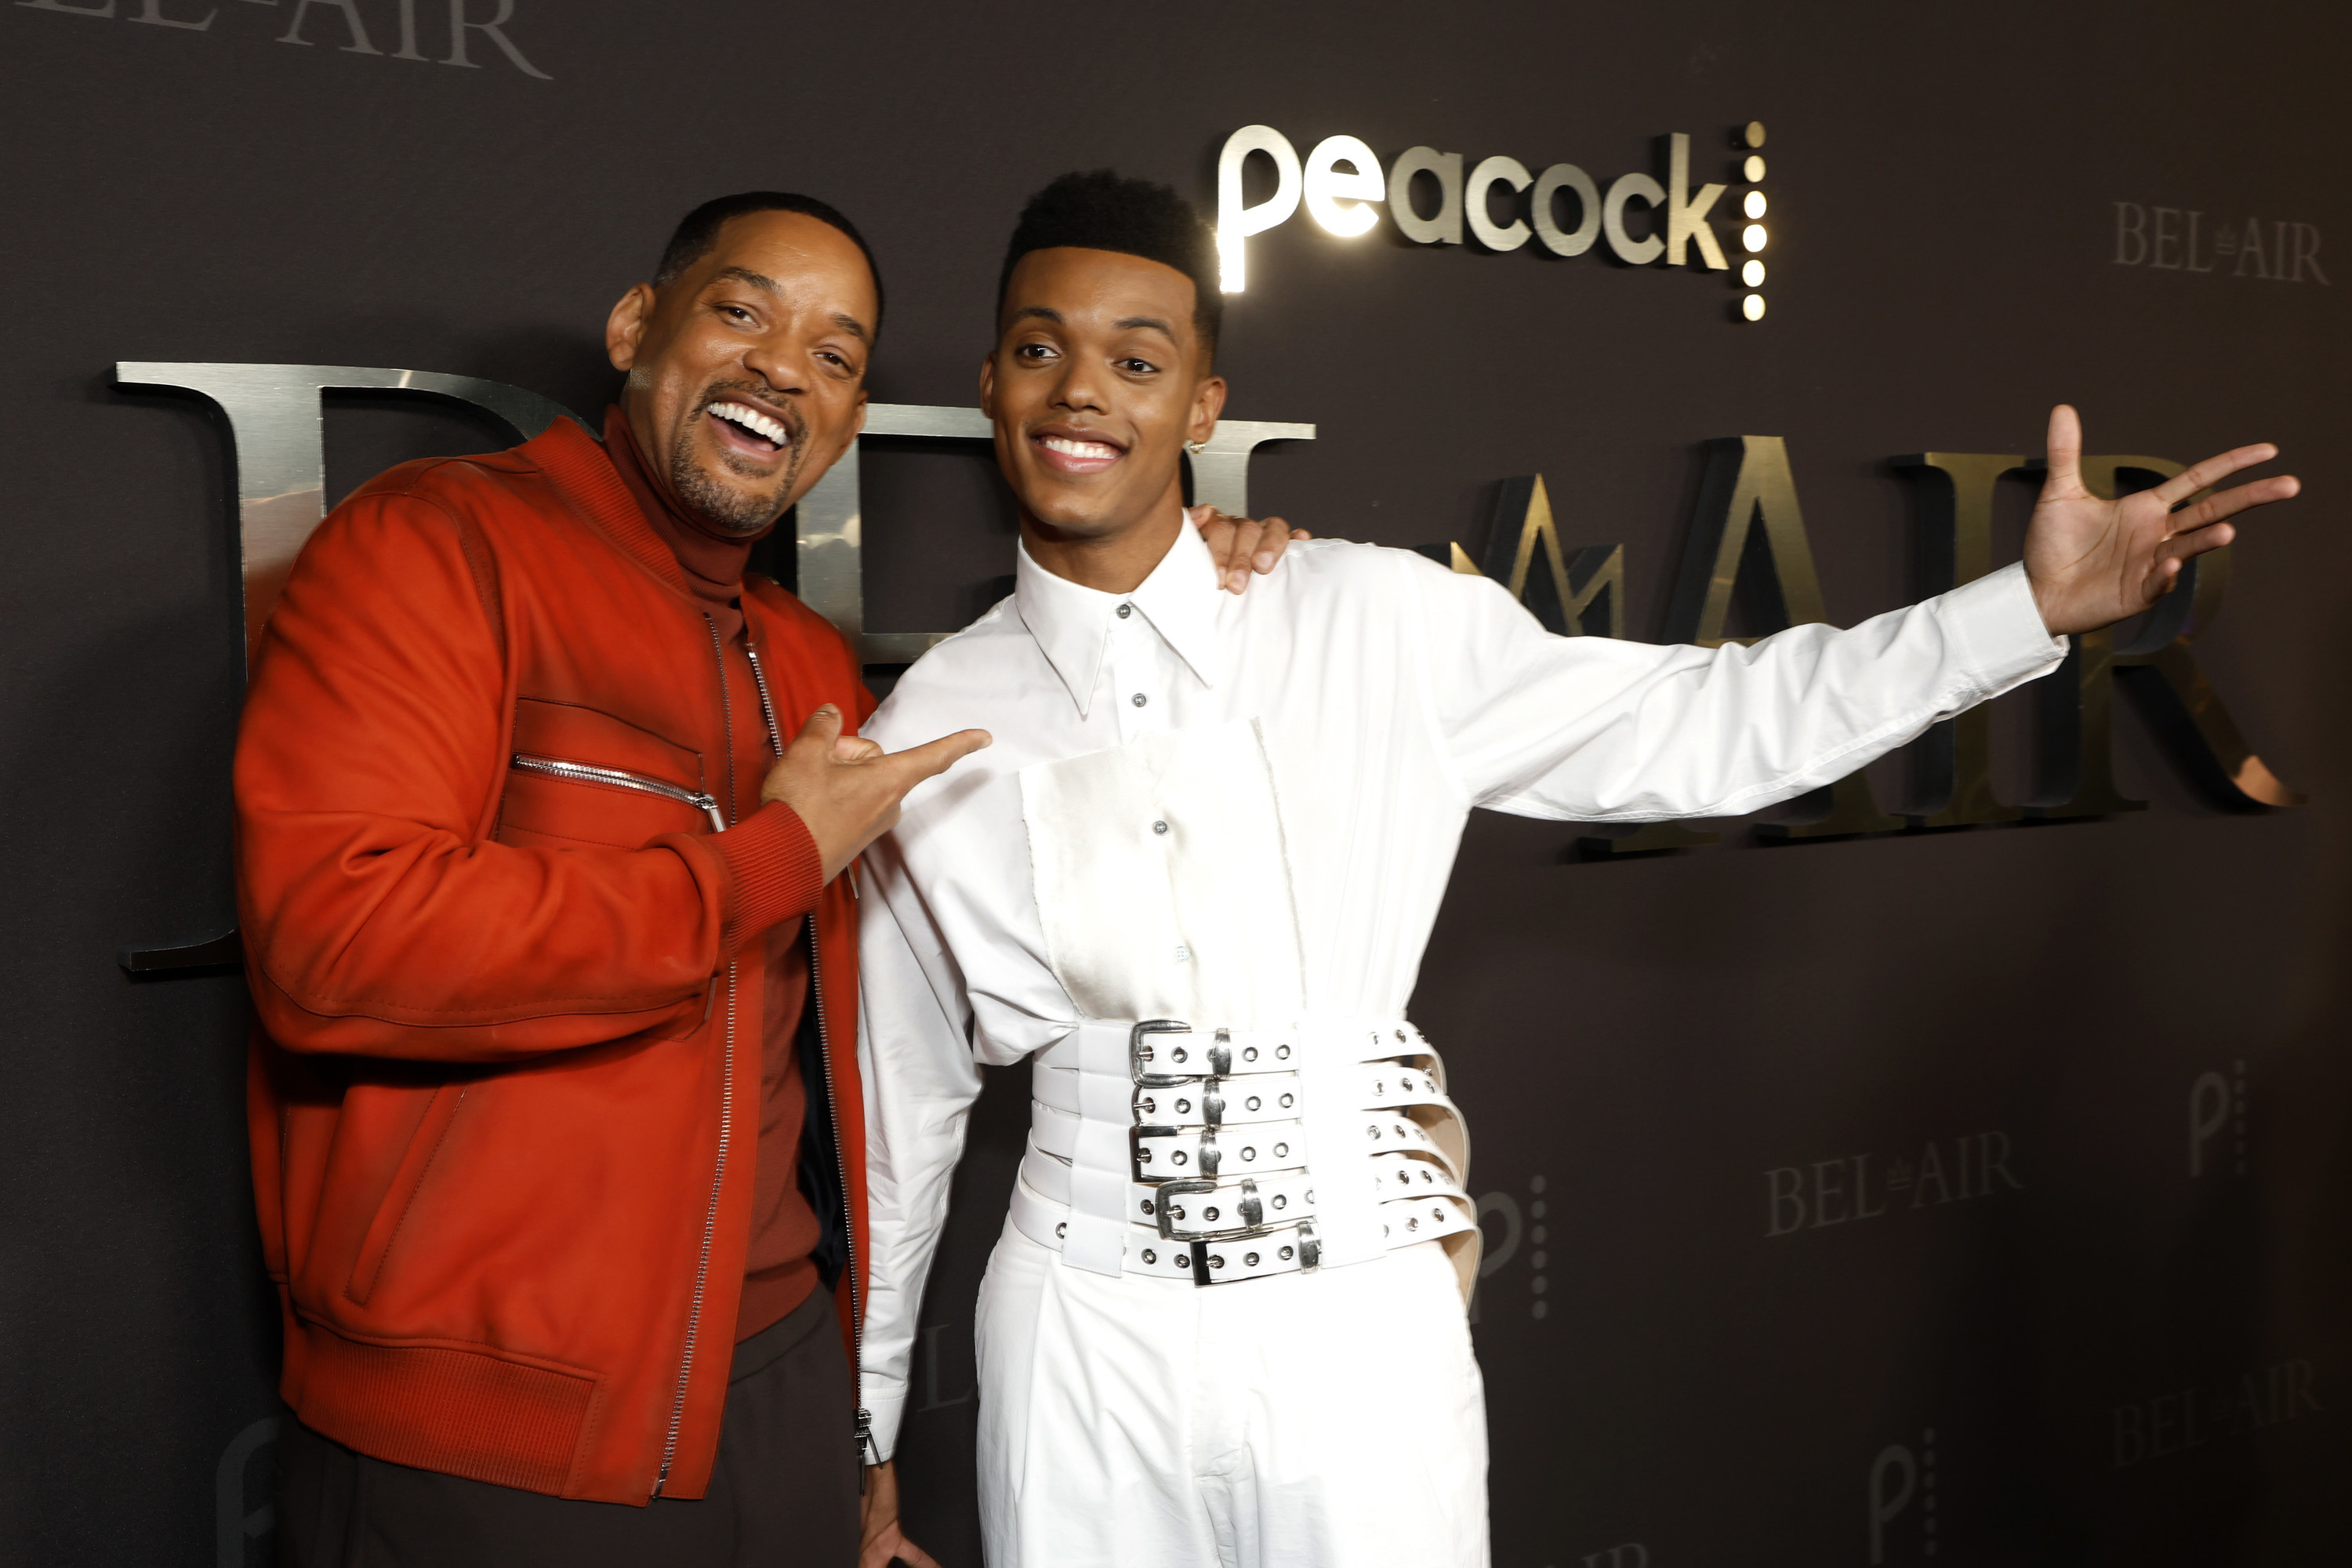 Will Smith and Jabari Banks pose together at the Peacock premiere of Bel-Air.